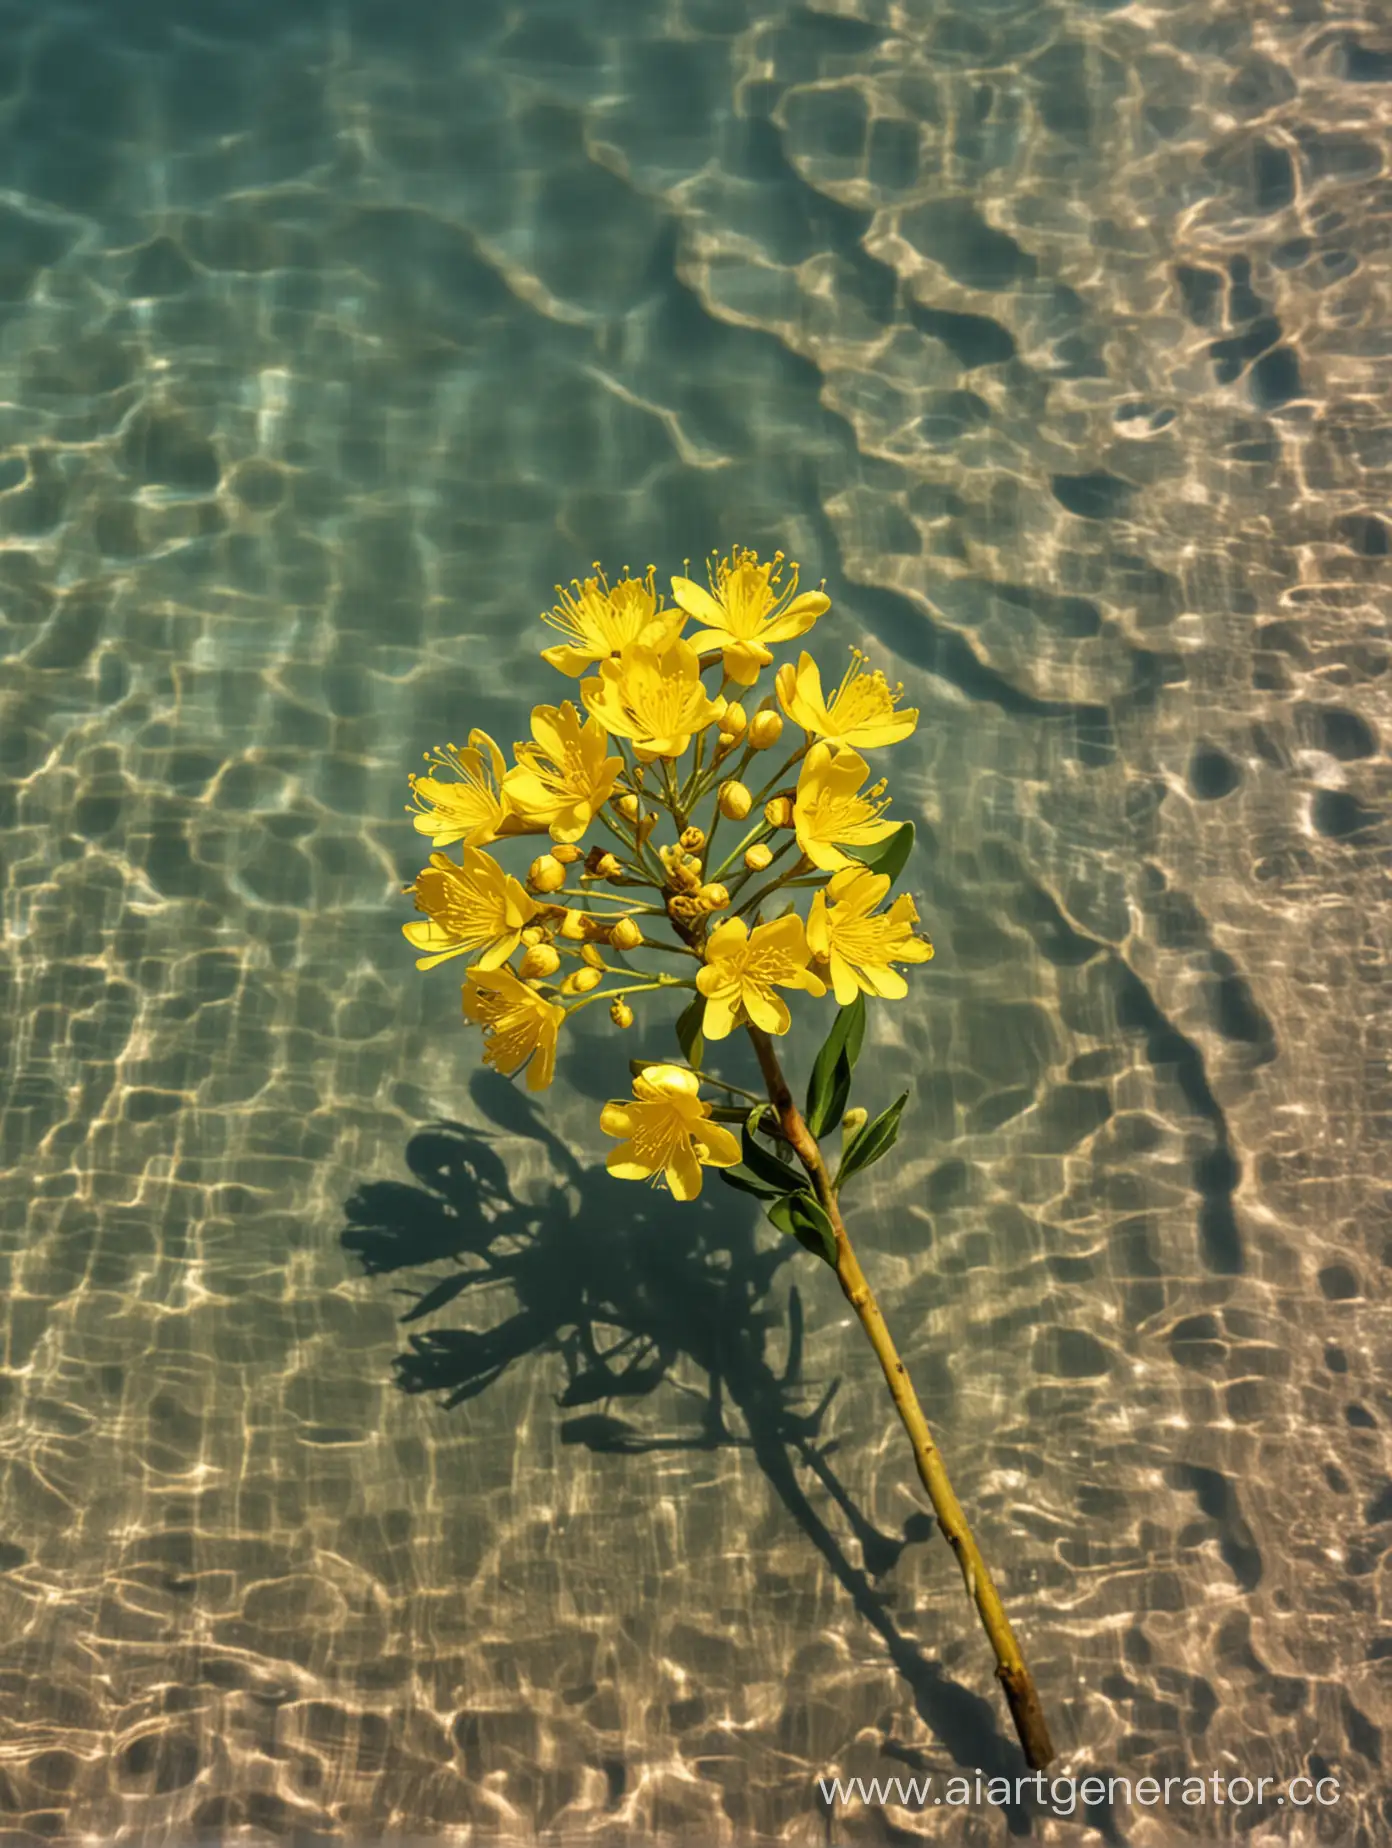 Acacia yellow flower close up 8k laying in water